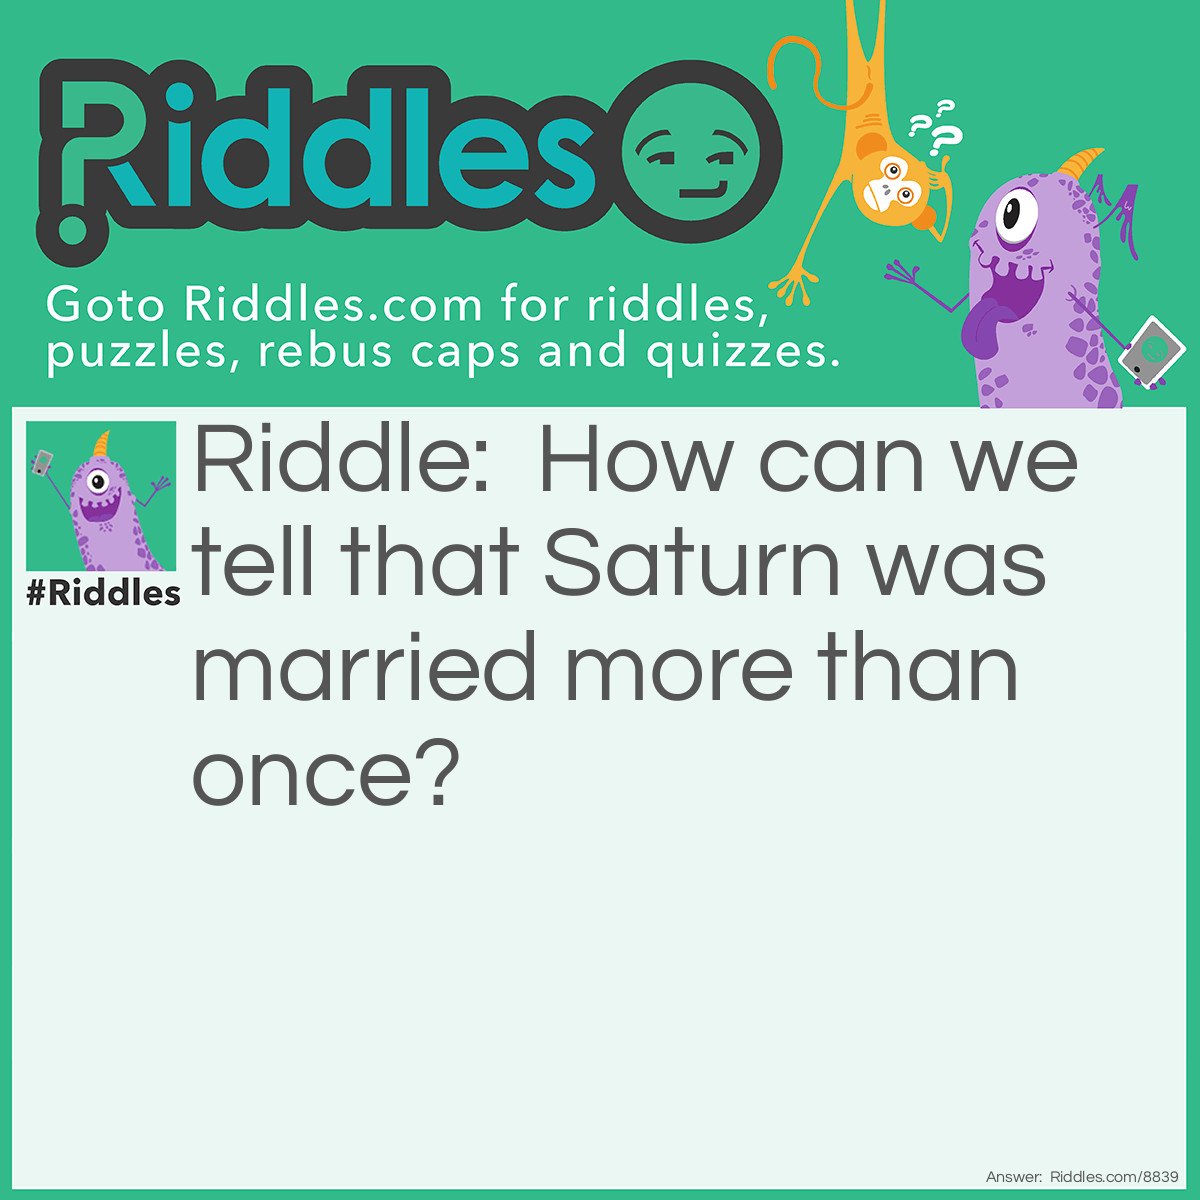 Riddle: How can we tell that Saturn was married more than once? Answer: Because she has so many rings!